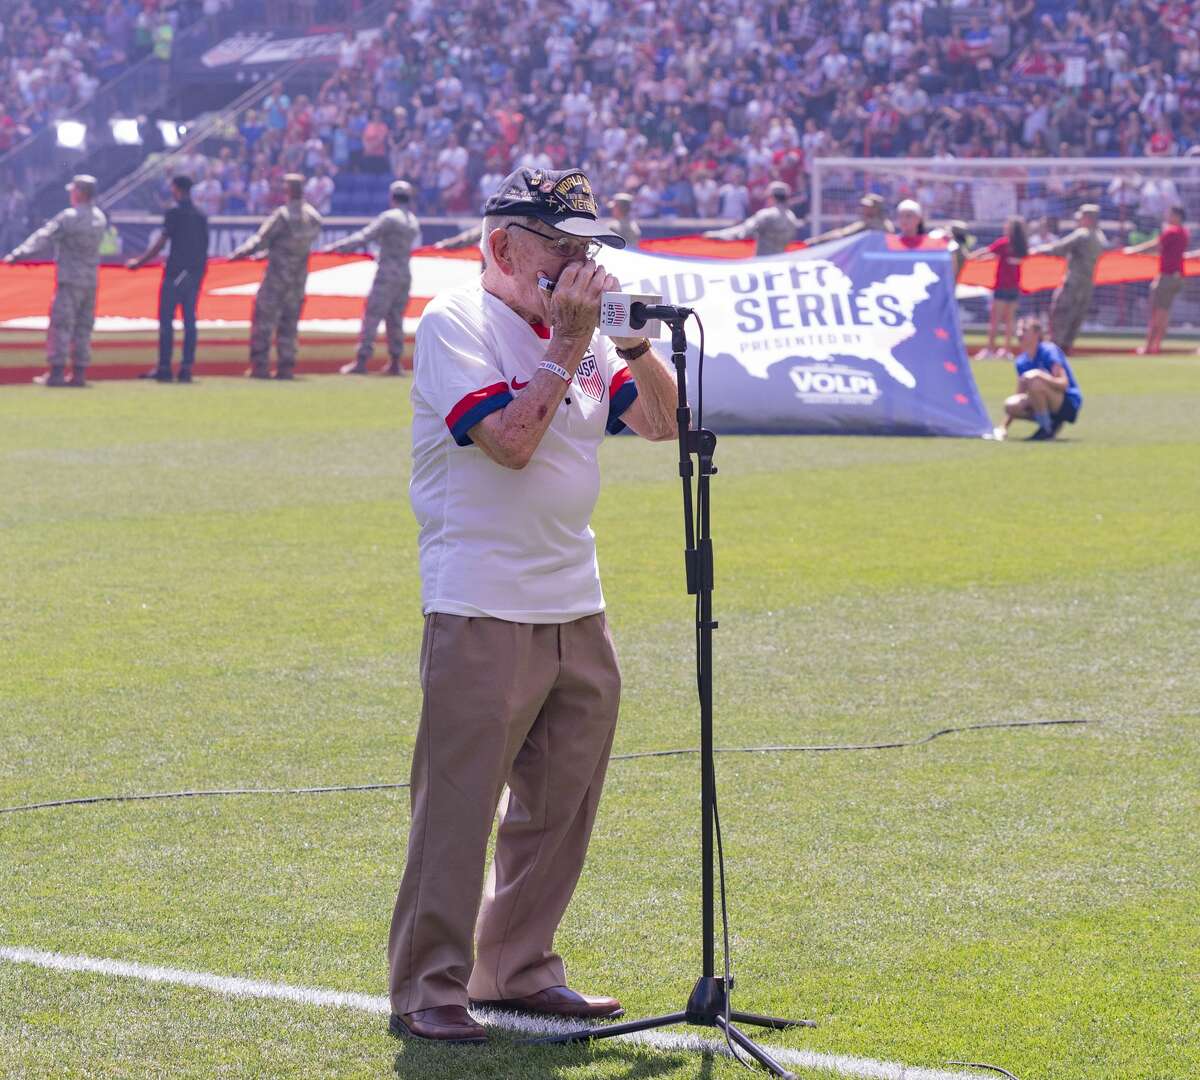 RED BULL ARENA, HARRISON, NEW JERSEY, UNITED STATES - 2019/05/26: 96-year-old World War II veteran Pete DuPre performs National Anthem on harmonica before friendly game between USA and Mexico on Red Bull Arena. USA won 3 - 0. (Photo by Lev Radin/Pacific Press/LightRocket via Getty Images)